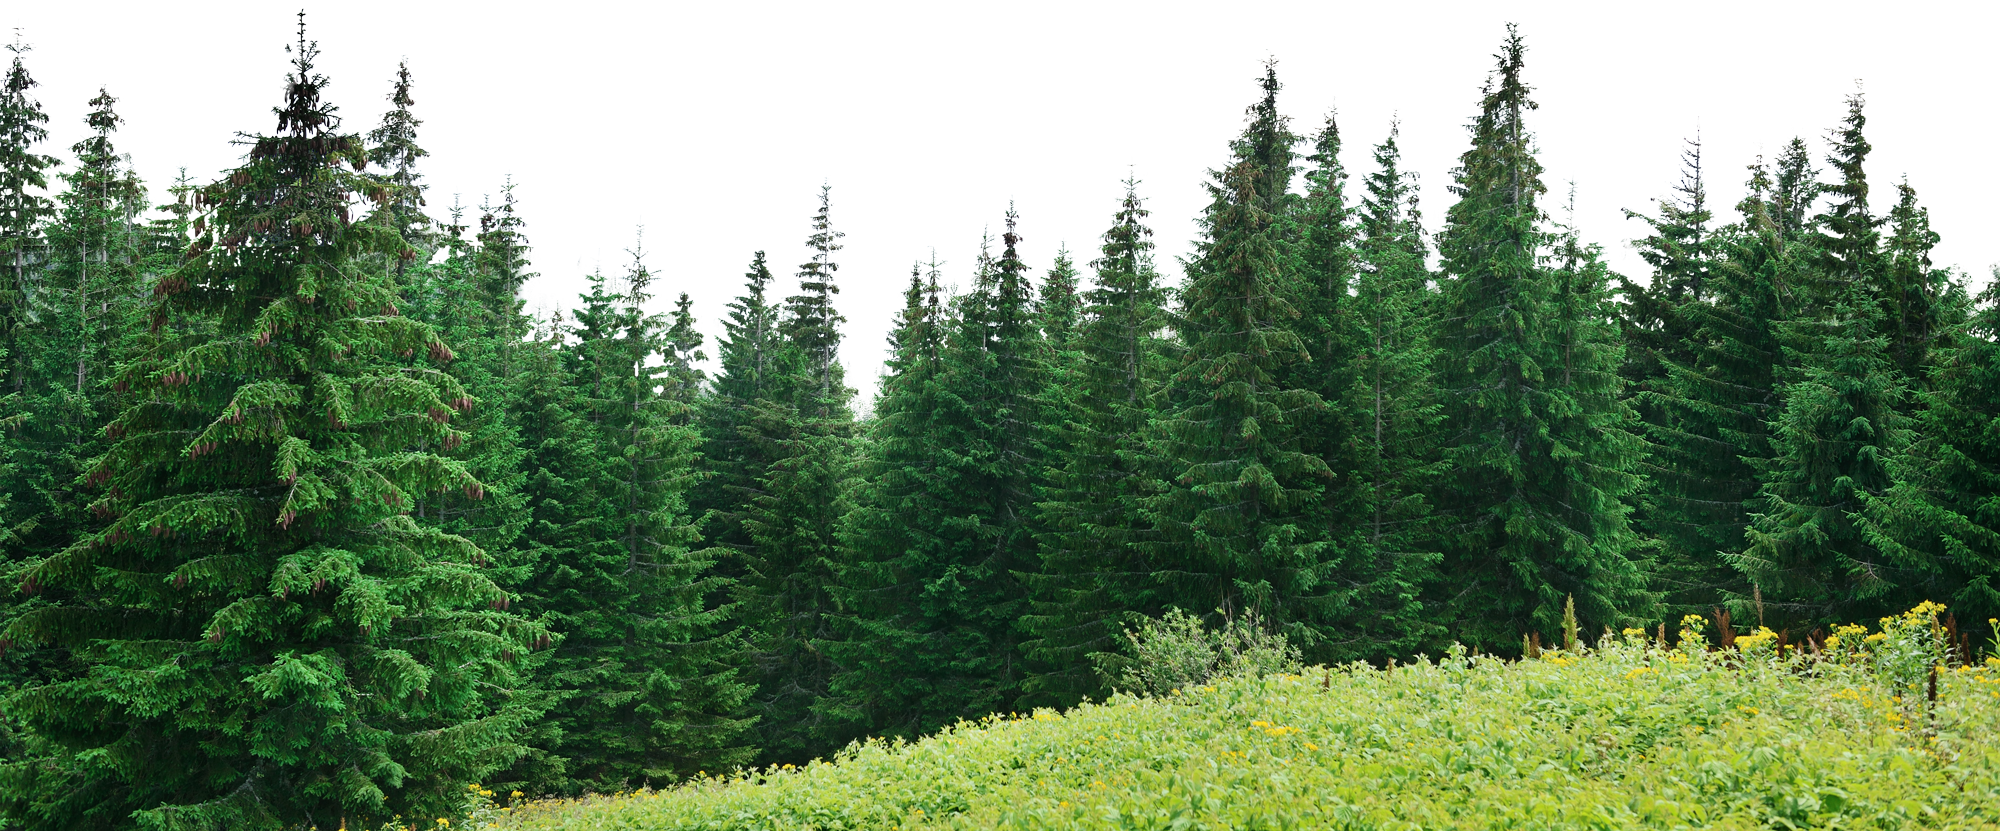 Forest PNG